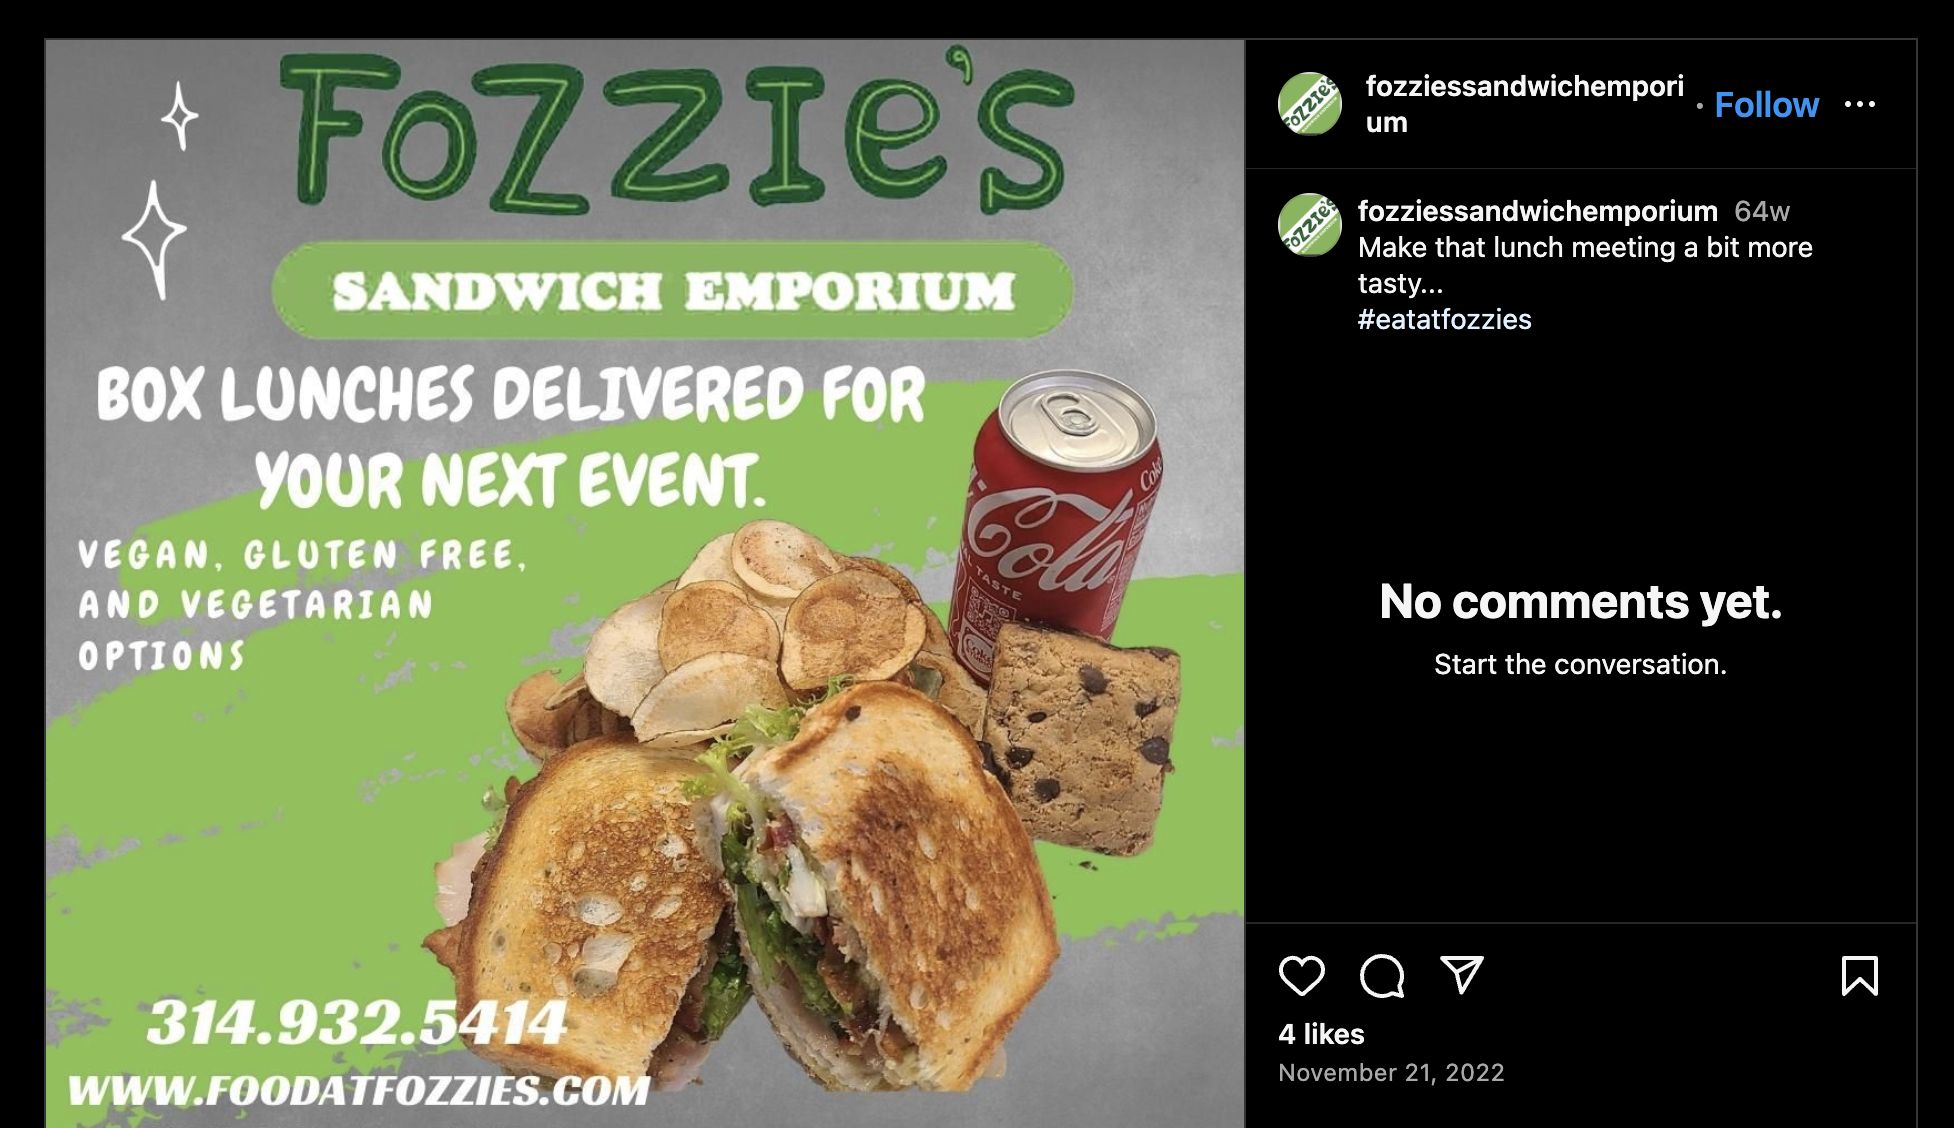 Instagram screenshot of sandwich from Saint Louis with Coke, cookie, chips, and a sandwich for delivery or takeout.